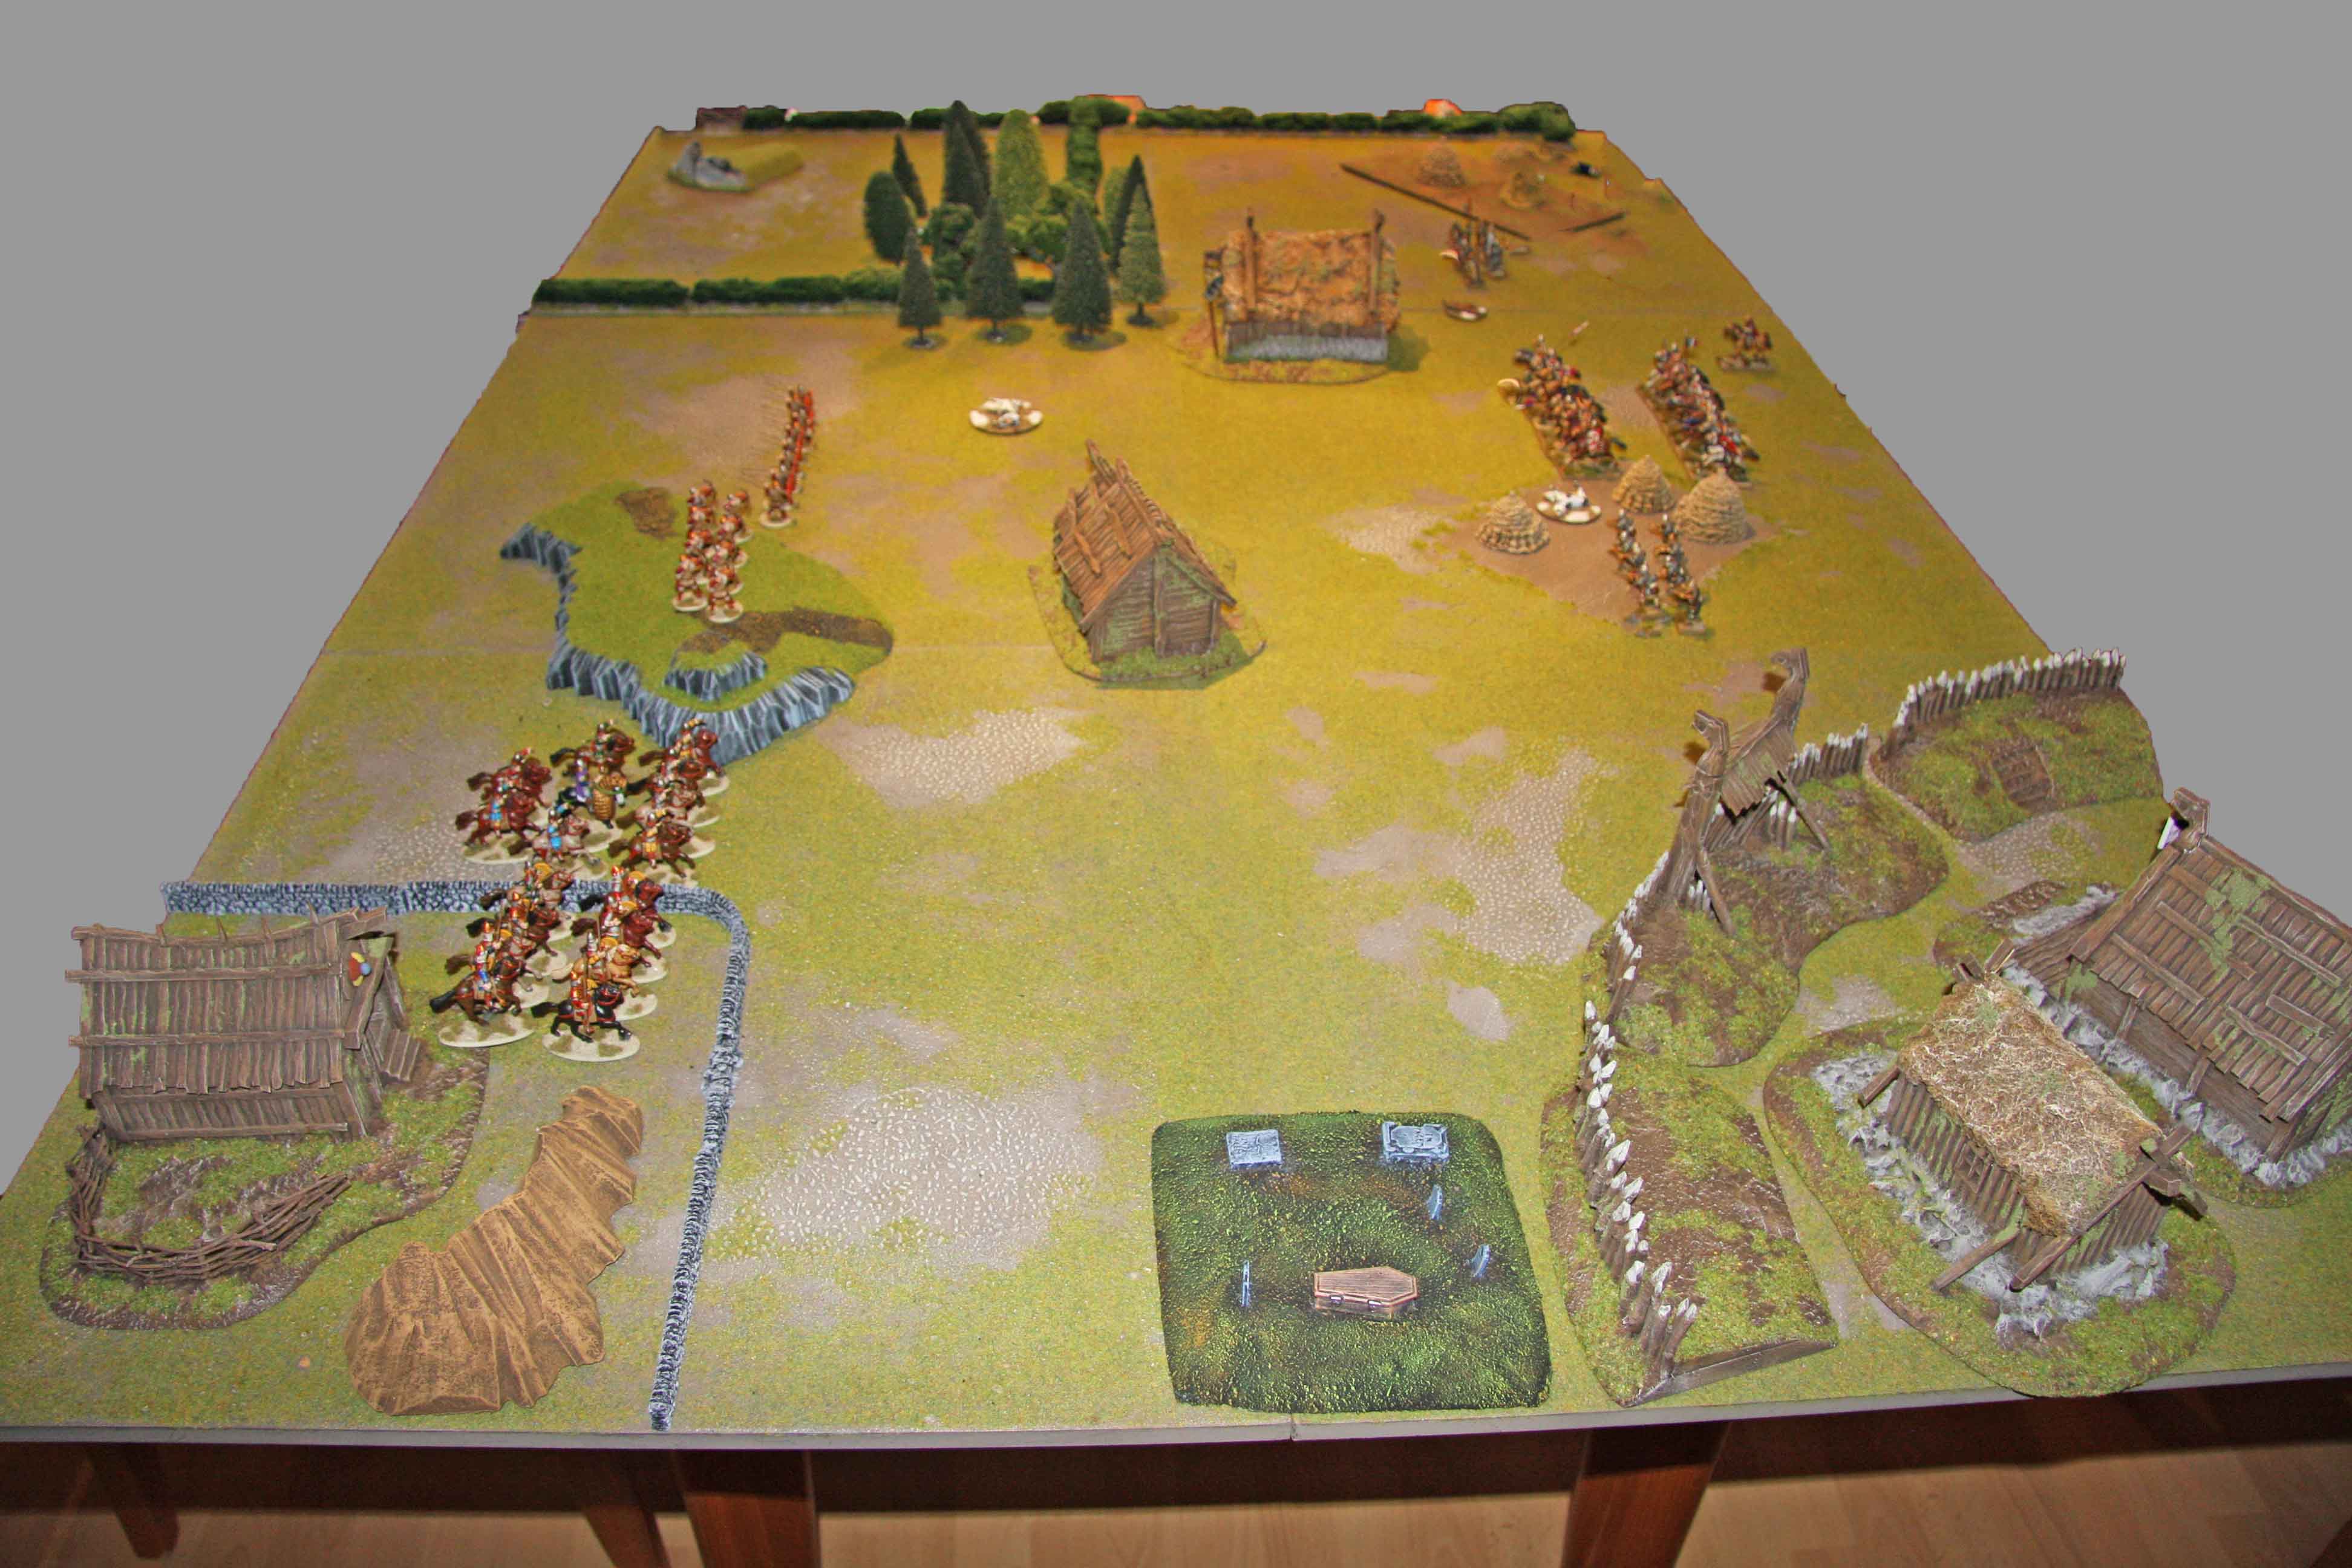 Table with deployed forces